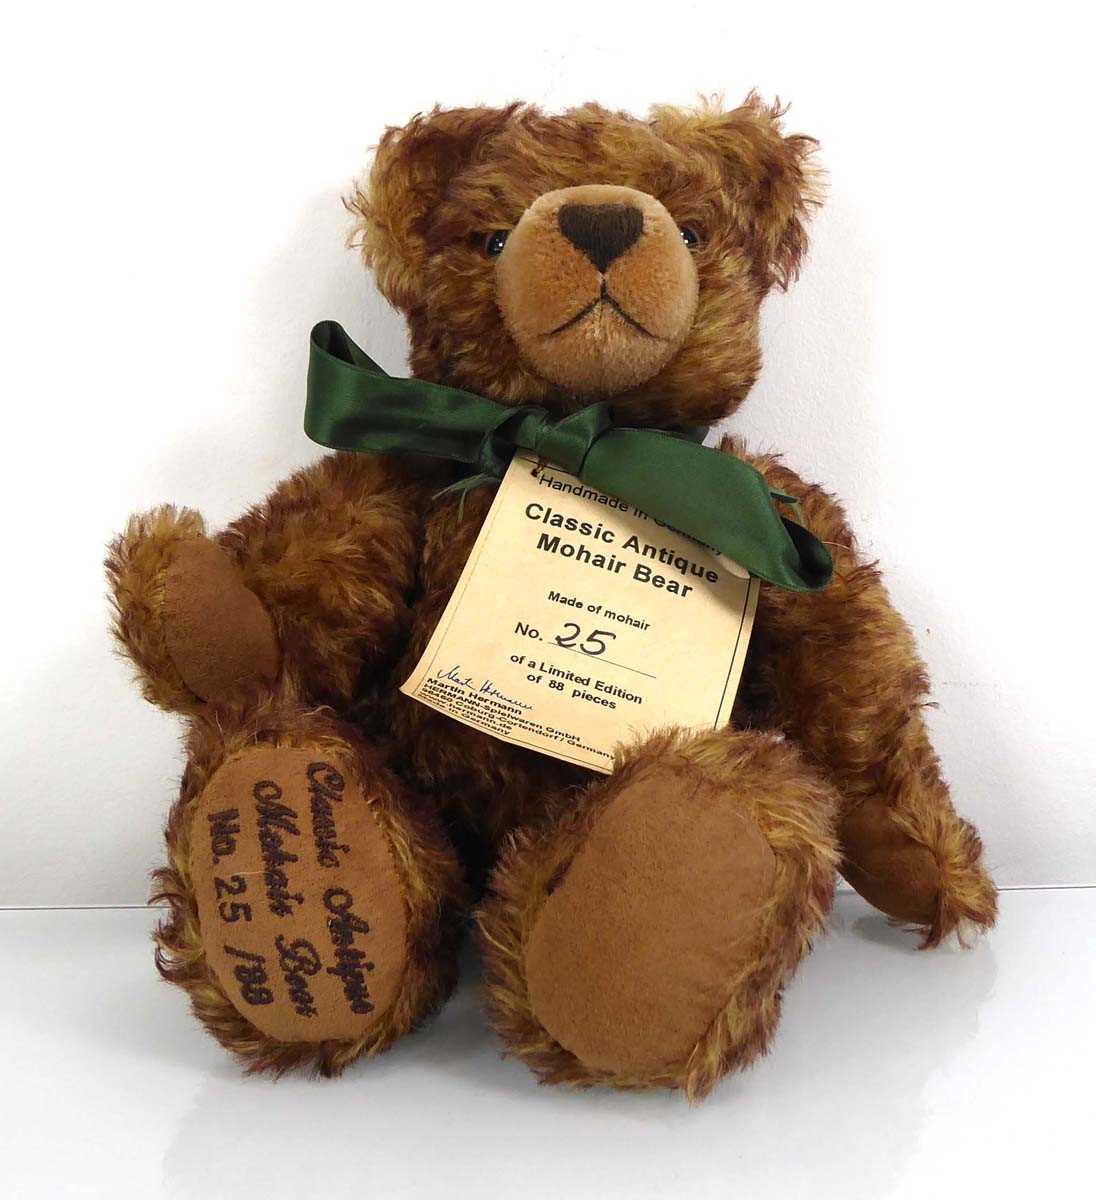 A limited edition fully jointed Hermann 'Classic Antique Mohair' bear